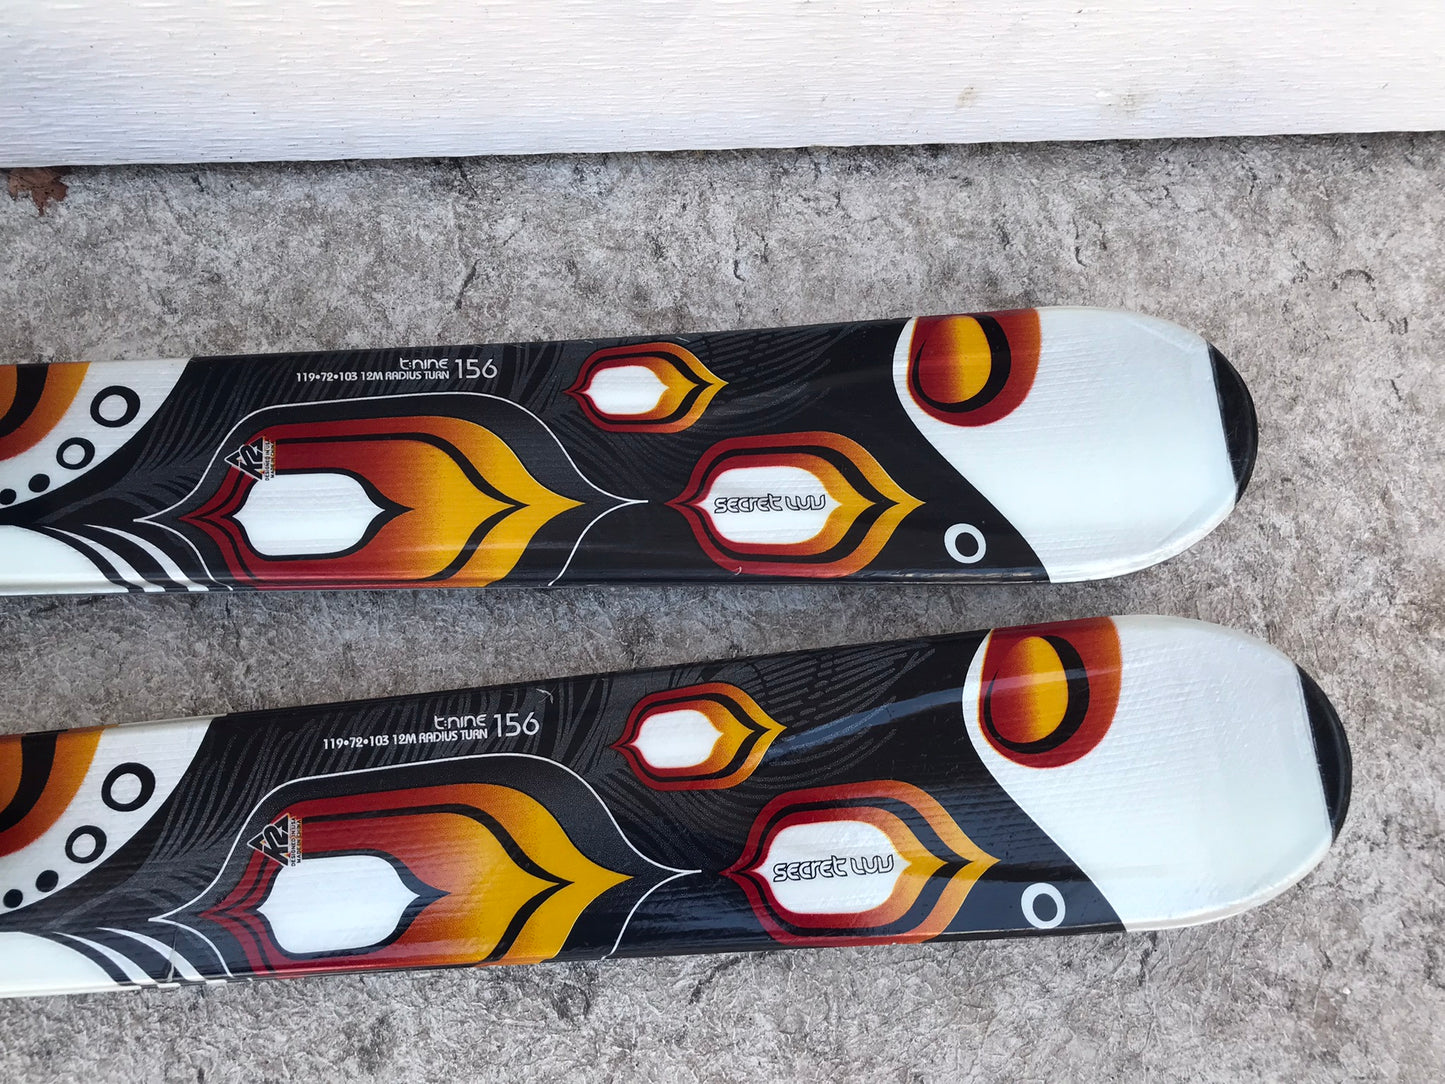 Ski 156 K-2 Twin Tip Secret Luv Silver Gold Black Parabolic with Bindings Excellent